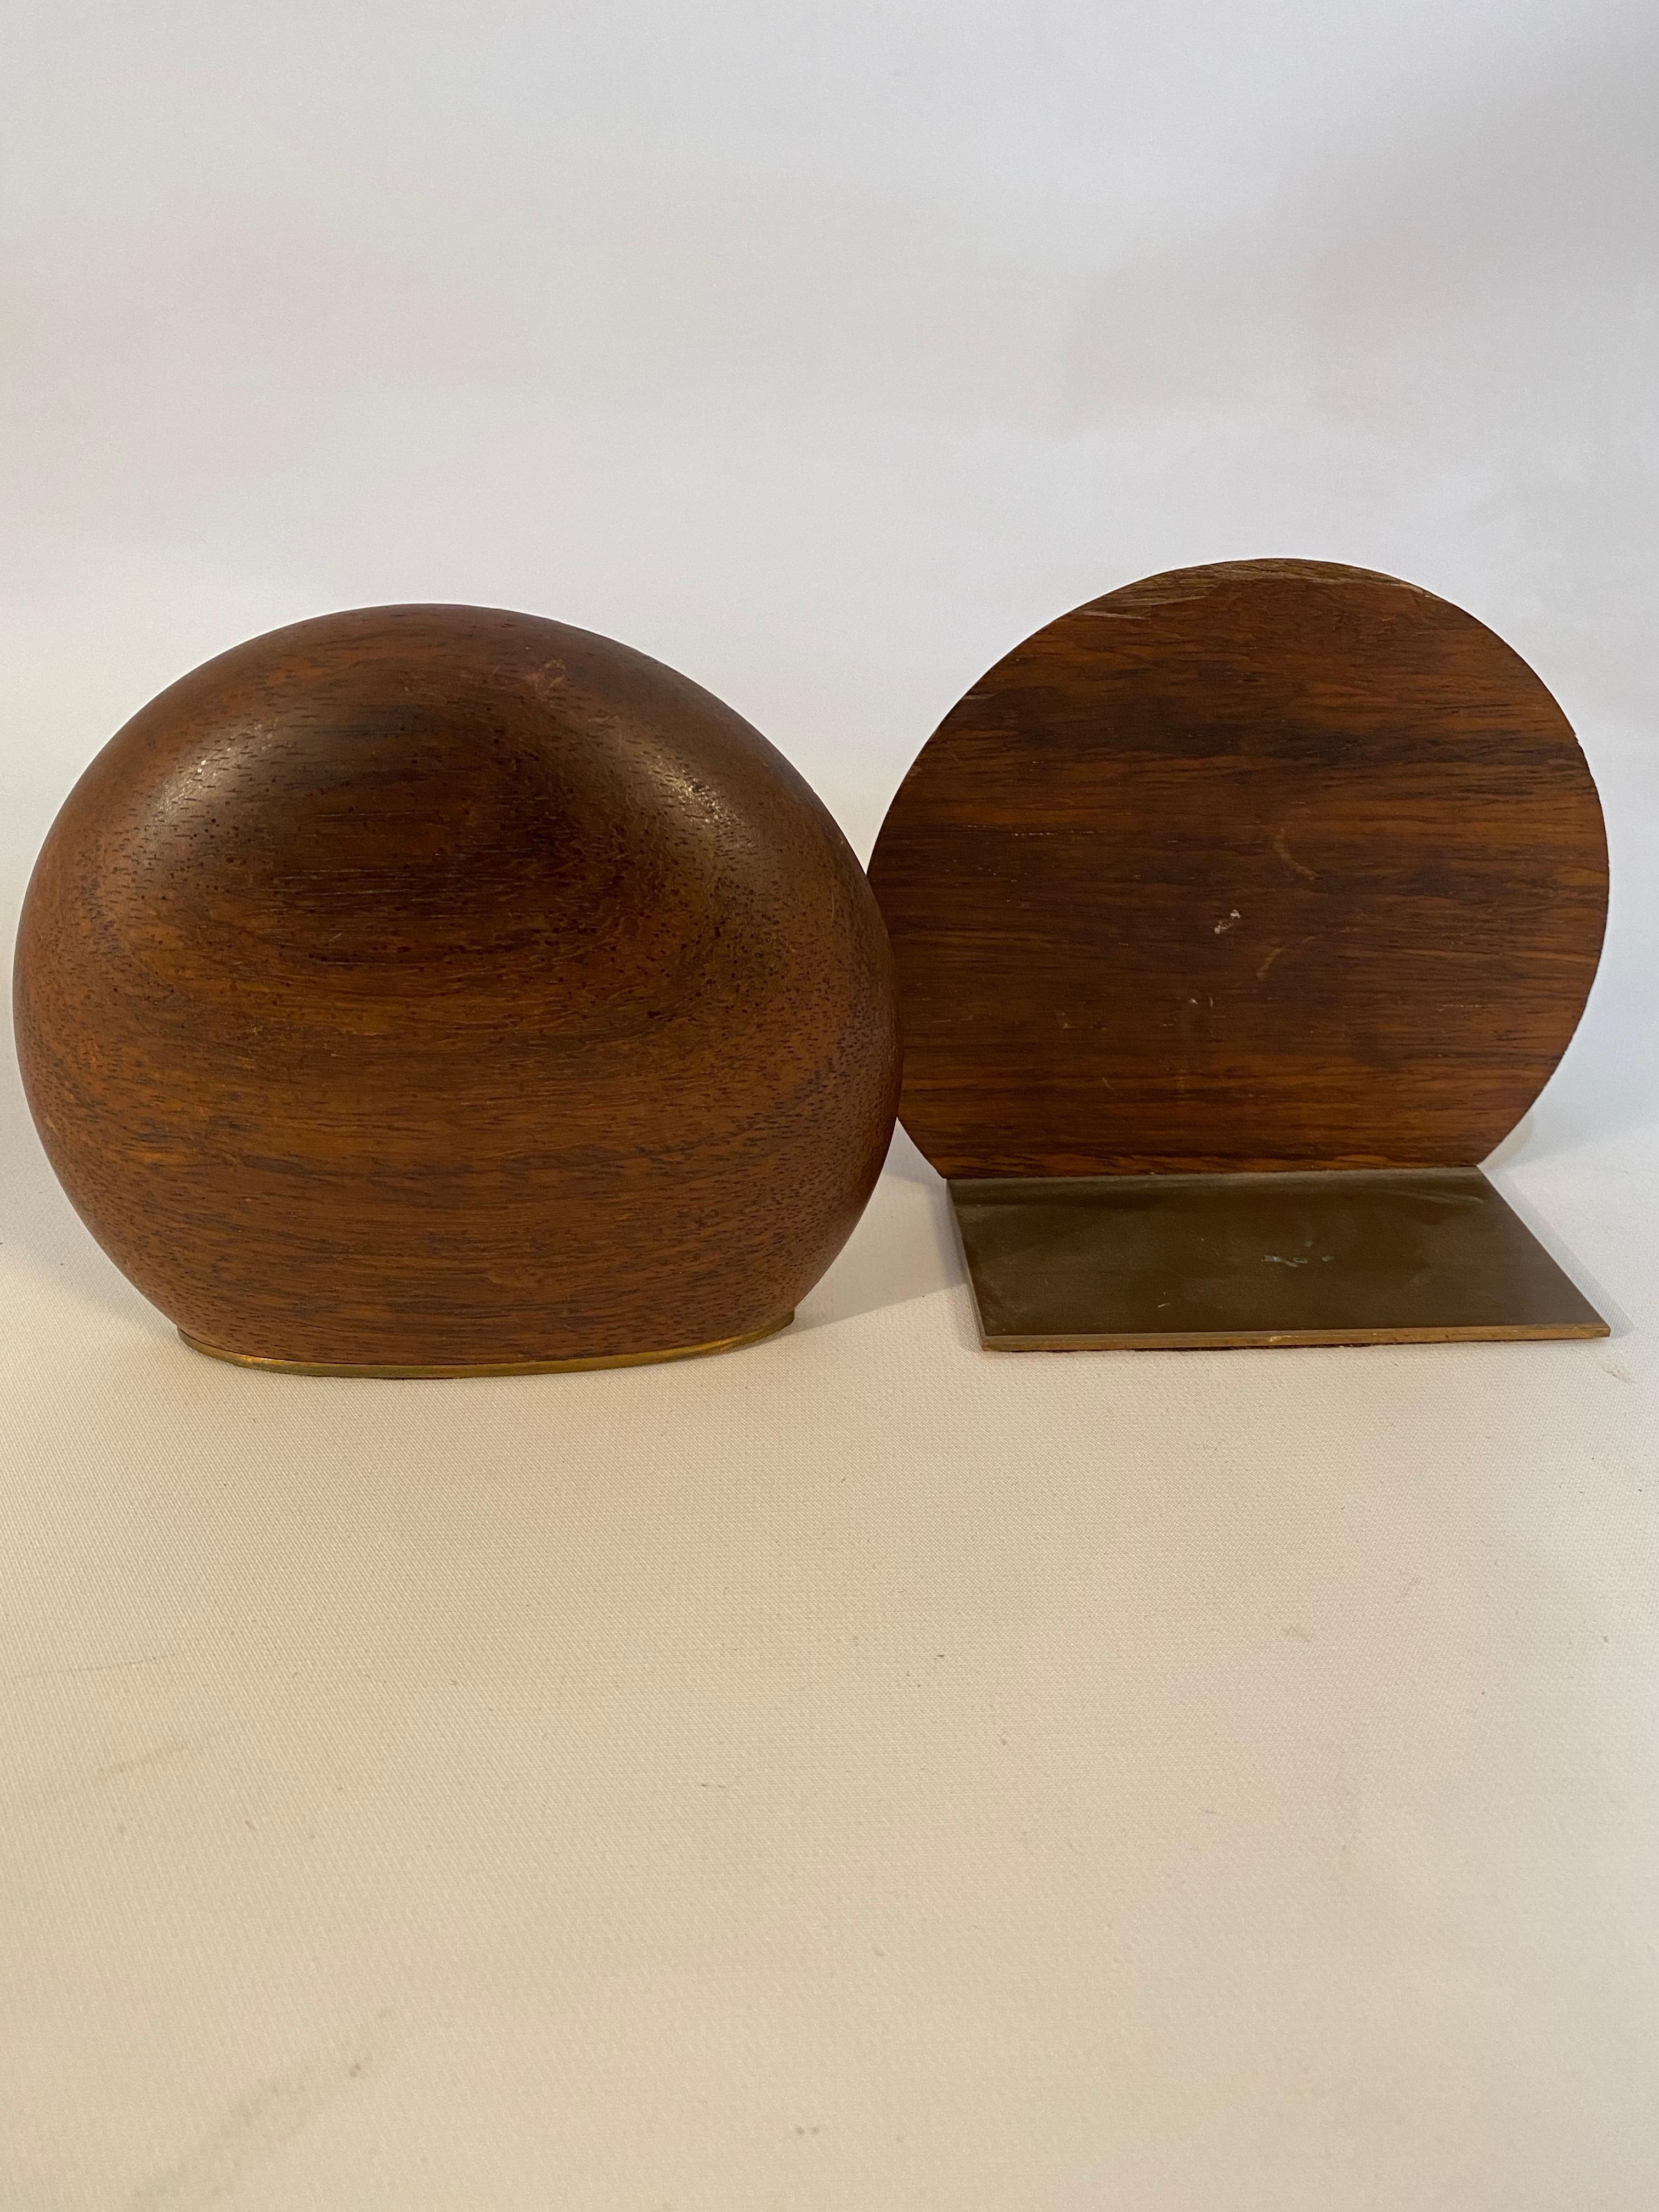 American Crafts Movement Wenge Wood Bookends 1